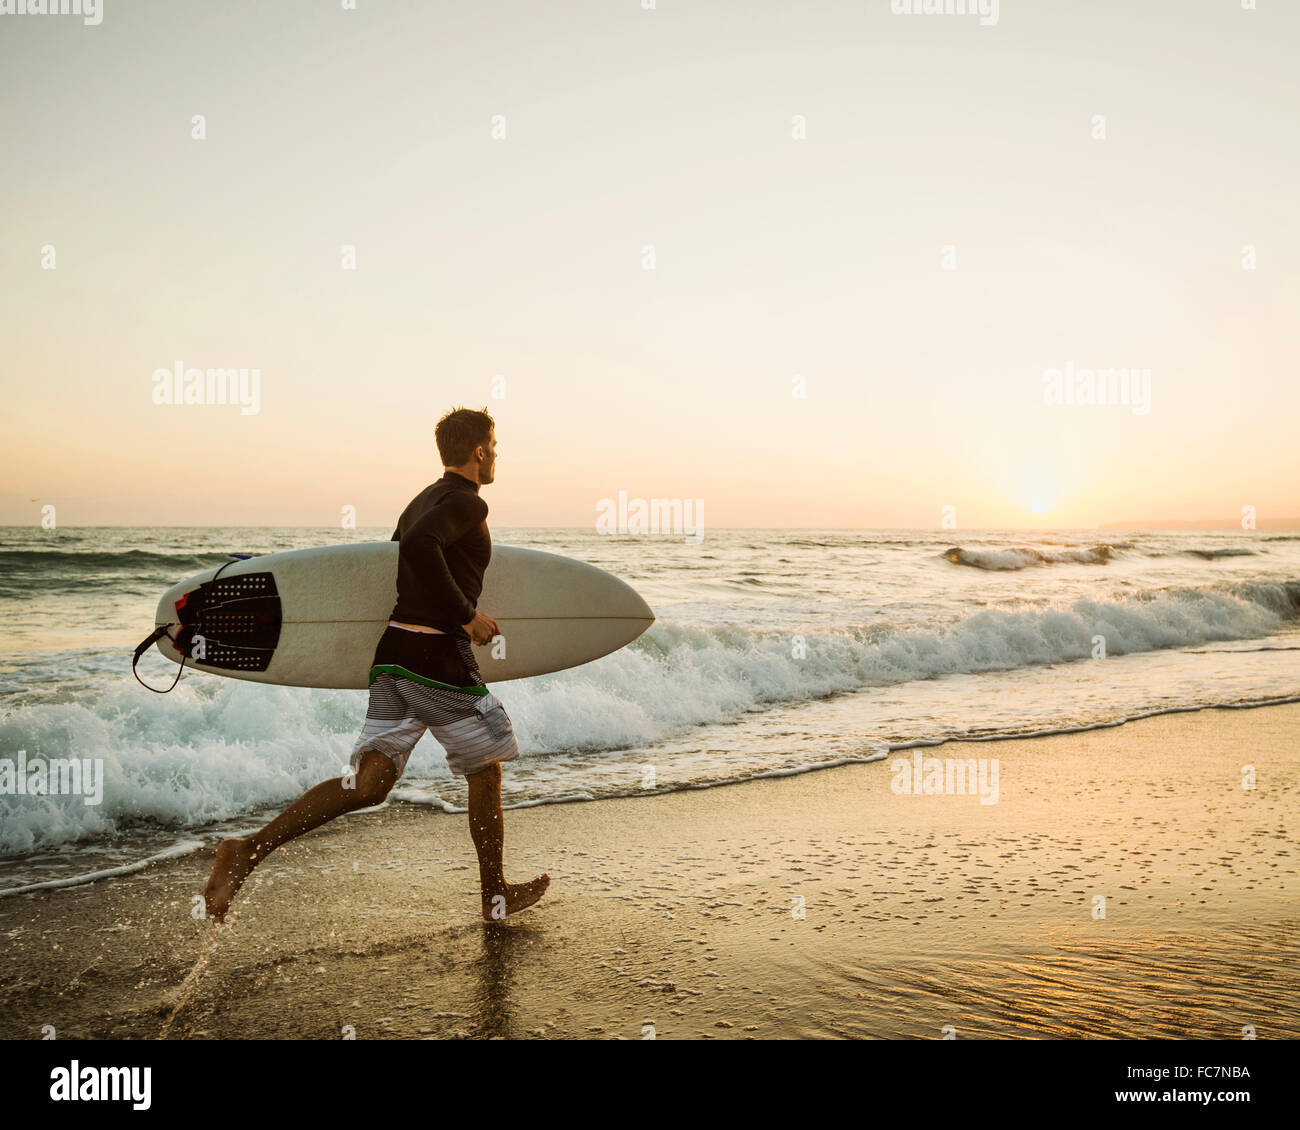 Caucasian man carrying surfboard on beach Banque D'Images